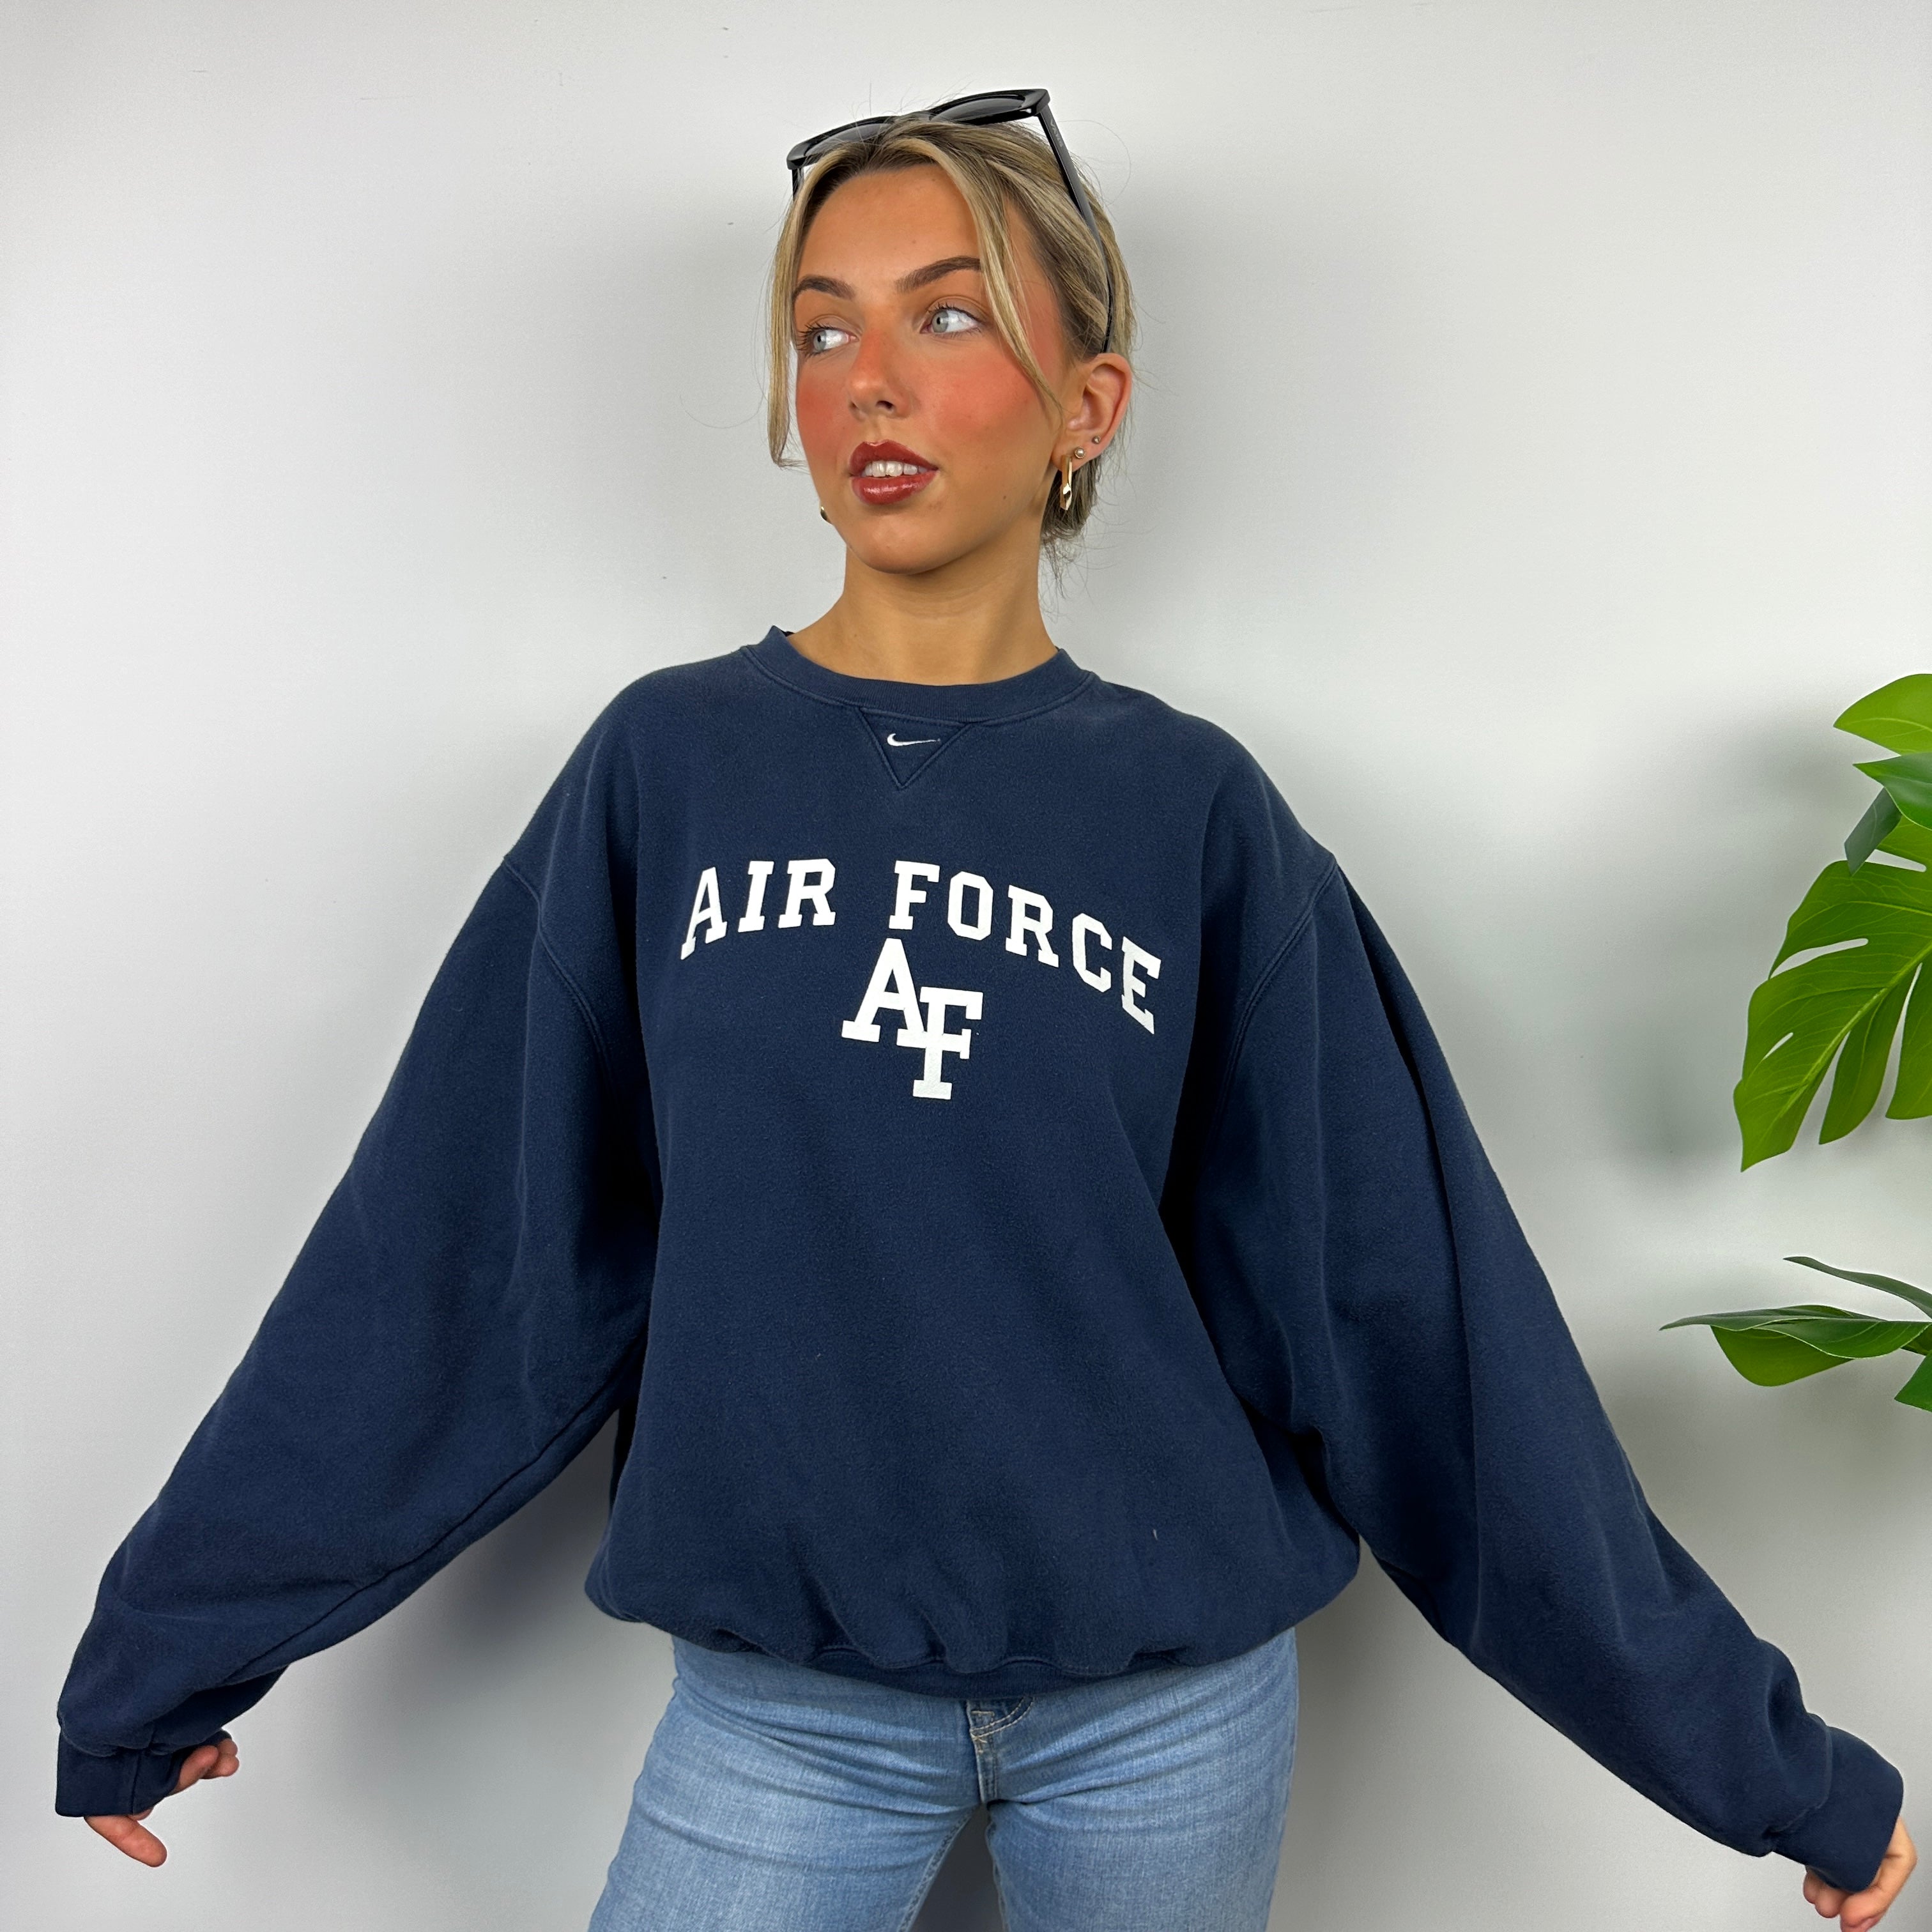 Nike x Air Force Navy Spell Out Sweatshirt (S)